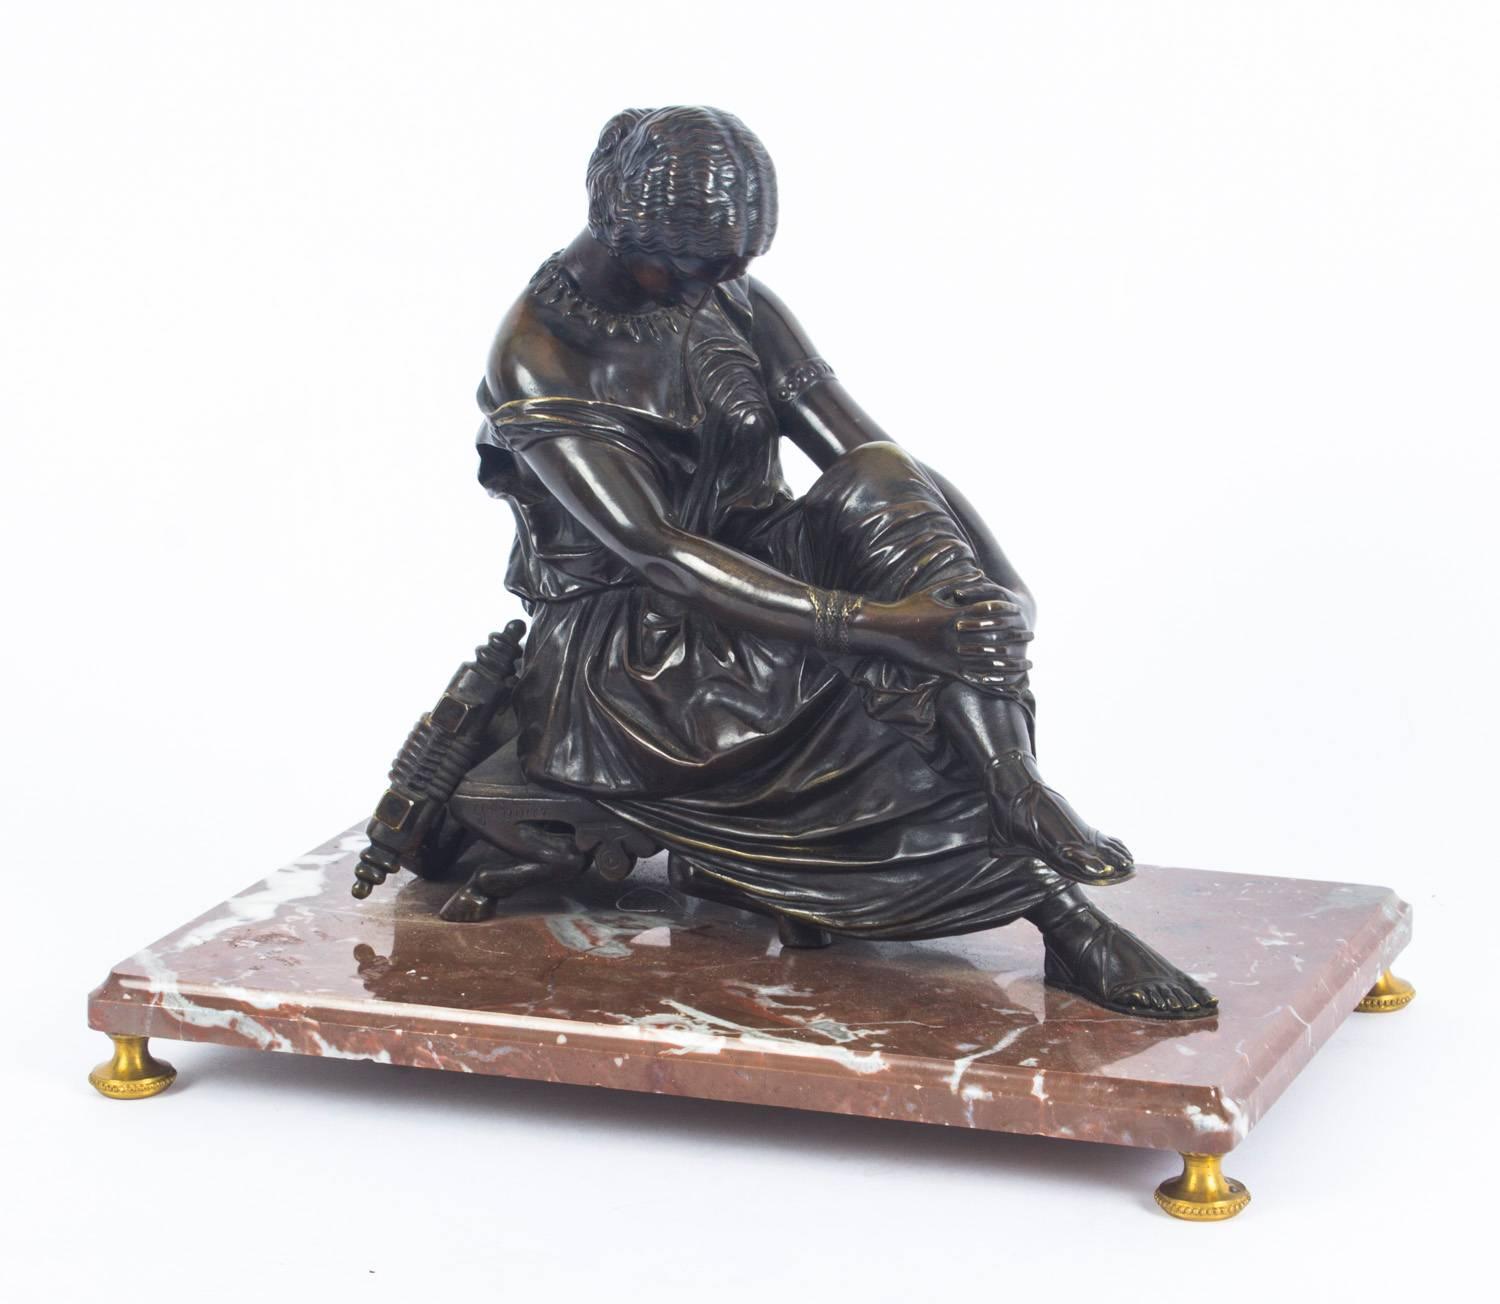 A beautiful French patinated bronze sculpture of a study of the seated poet Sappho, signed J. Pradier, with Suisse Freres foundry mark, circa 1830 in date.

The sculpture portrays the classically dressed poet Sappho seated on a stool with a lyre,